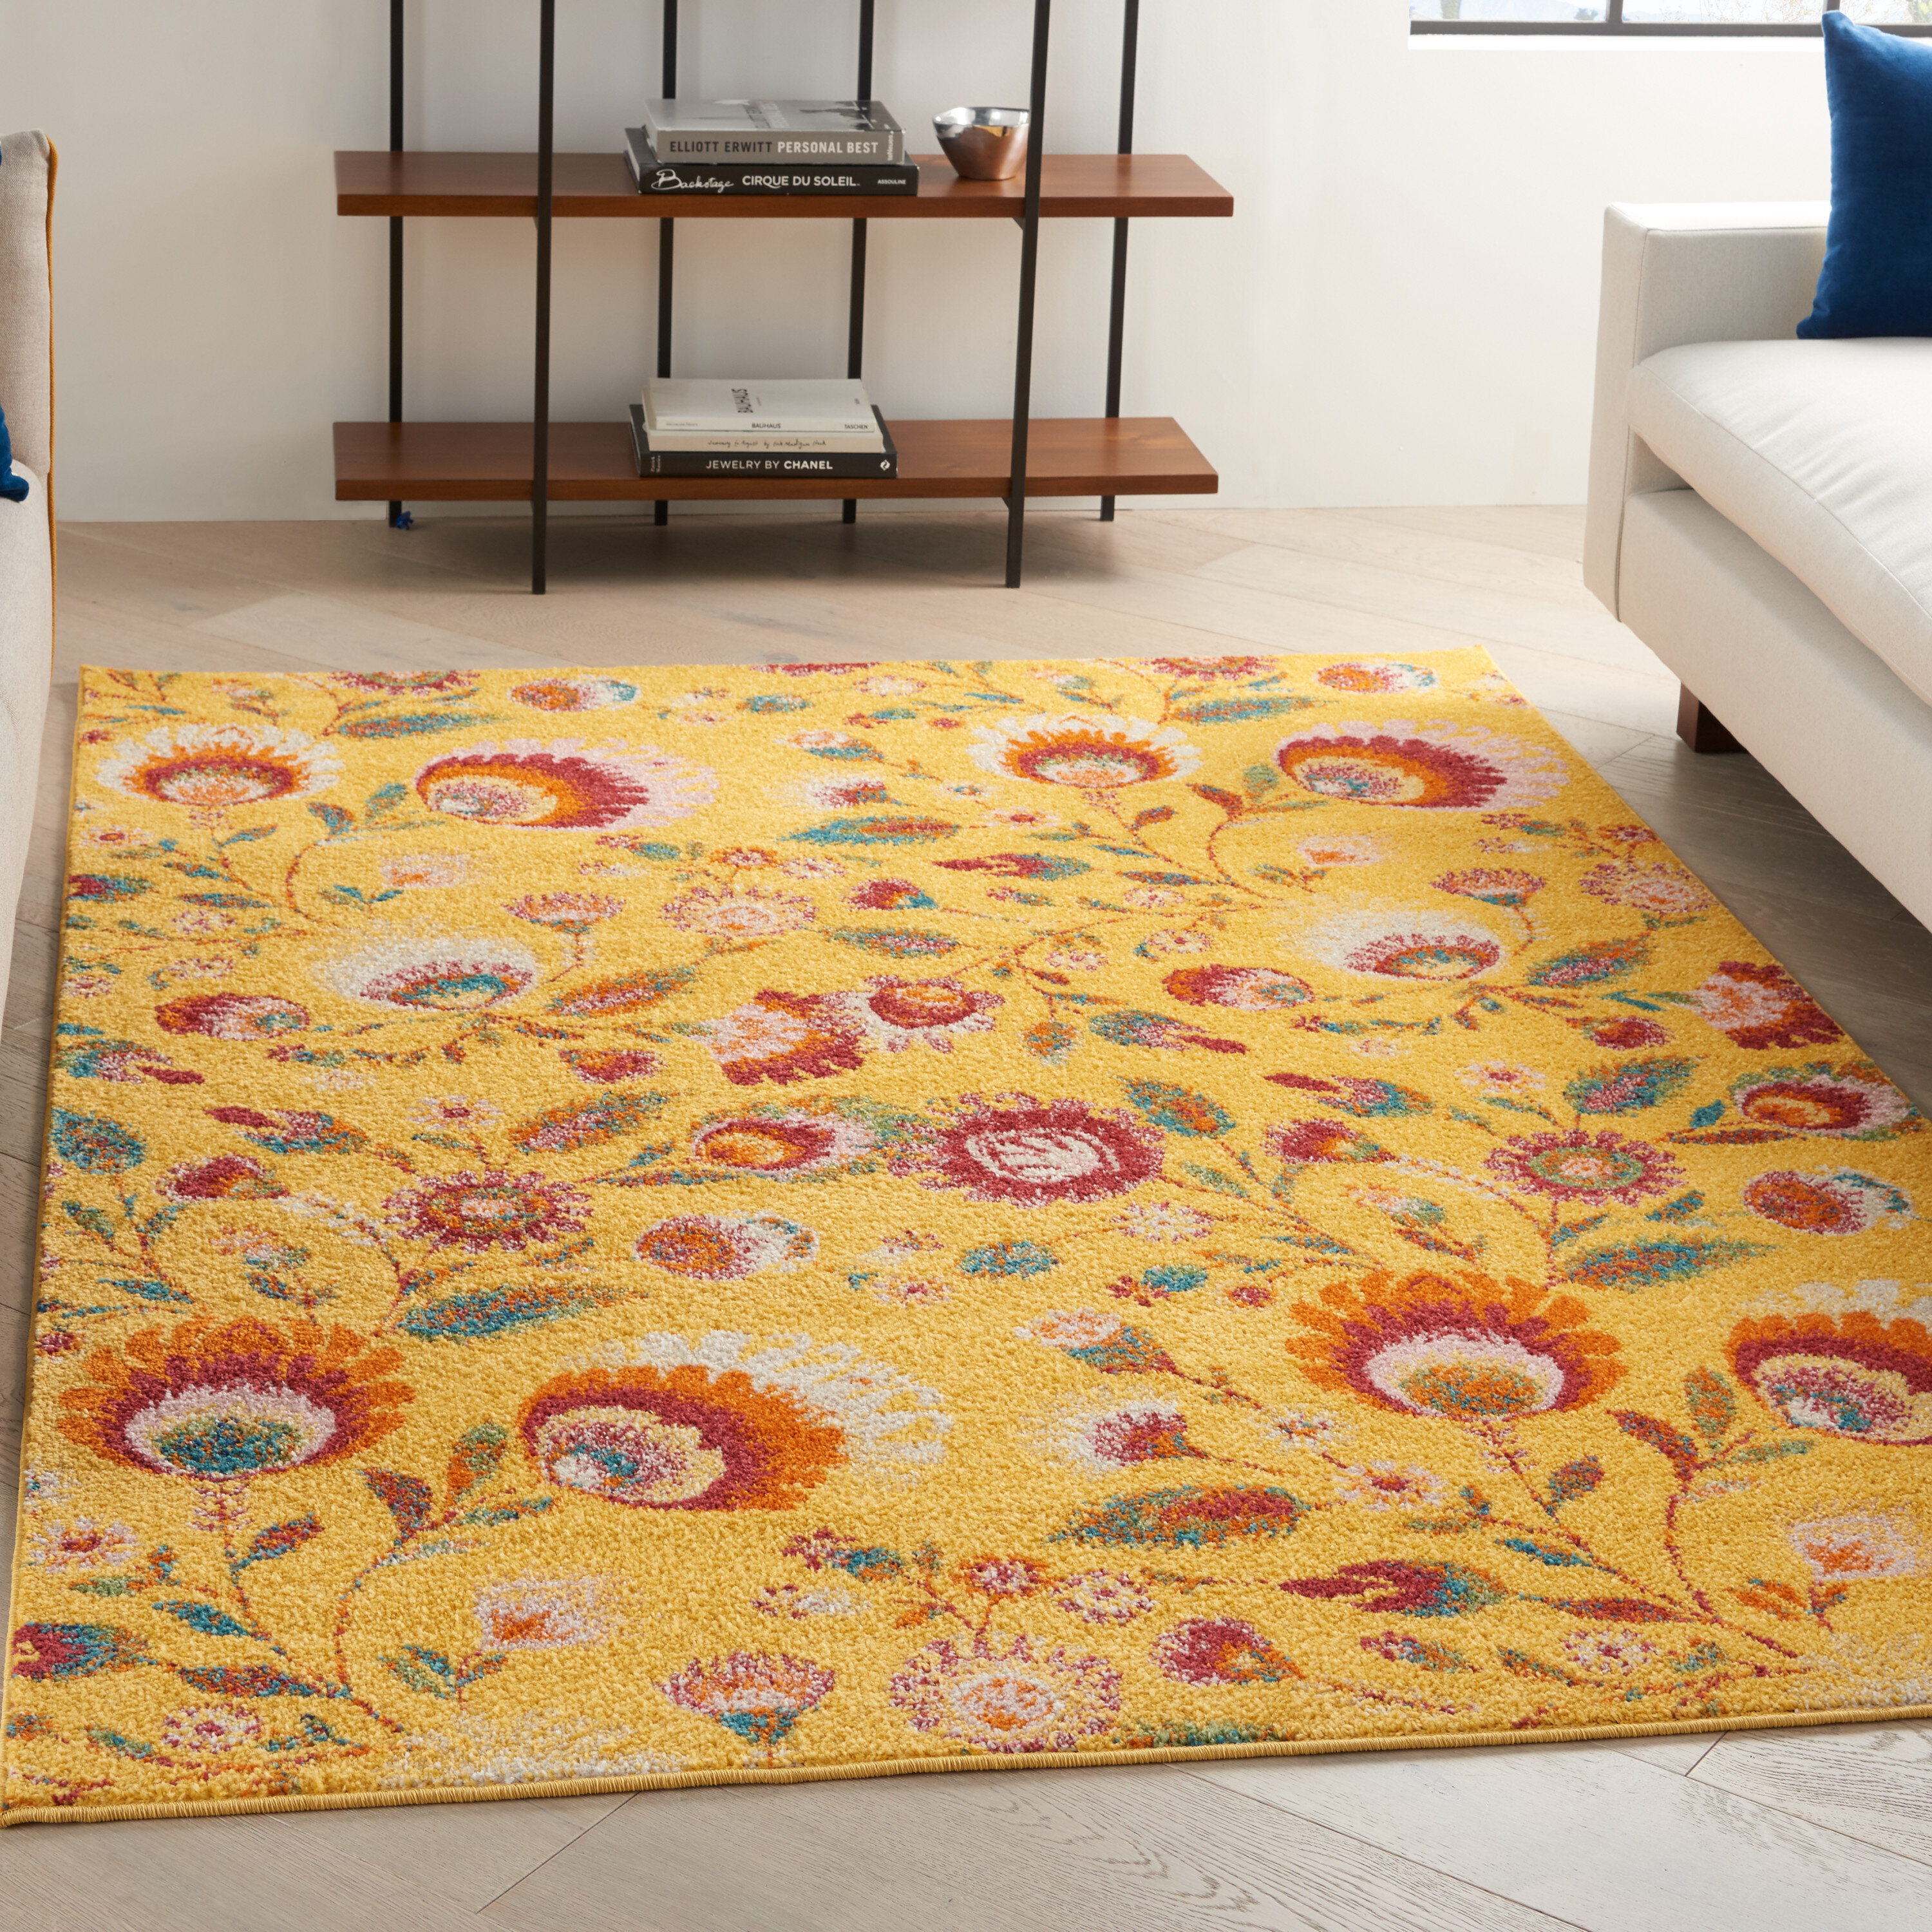 Weldin Floral Yellow Area Rug Bungalow Rose Rug Size: Rectangle 5'3 x 7'3